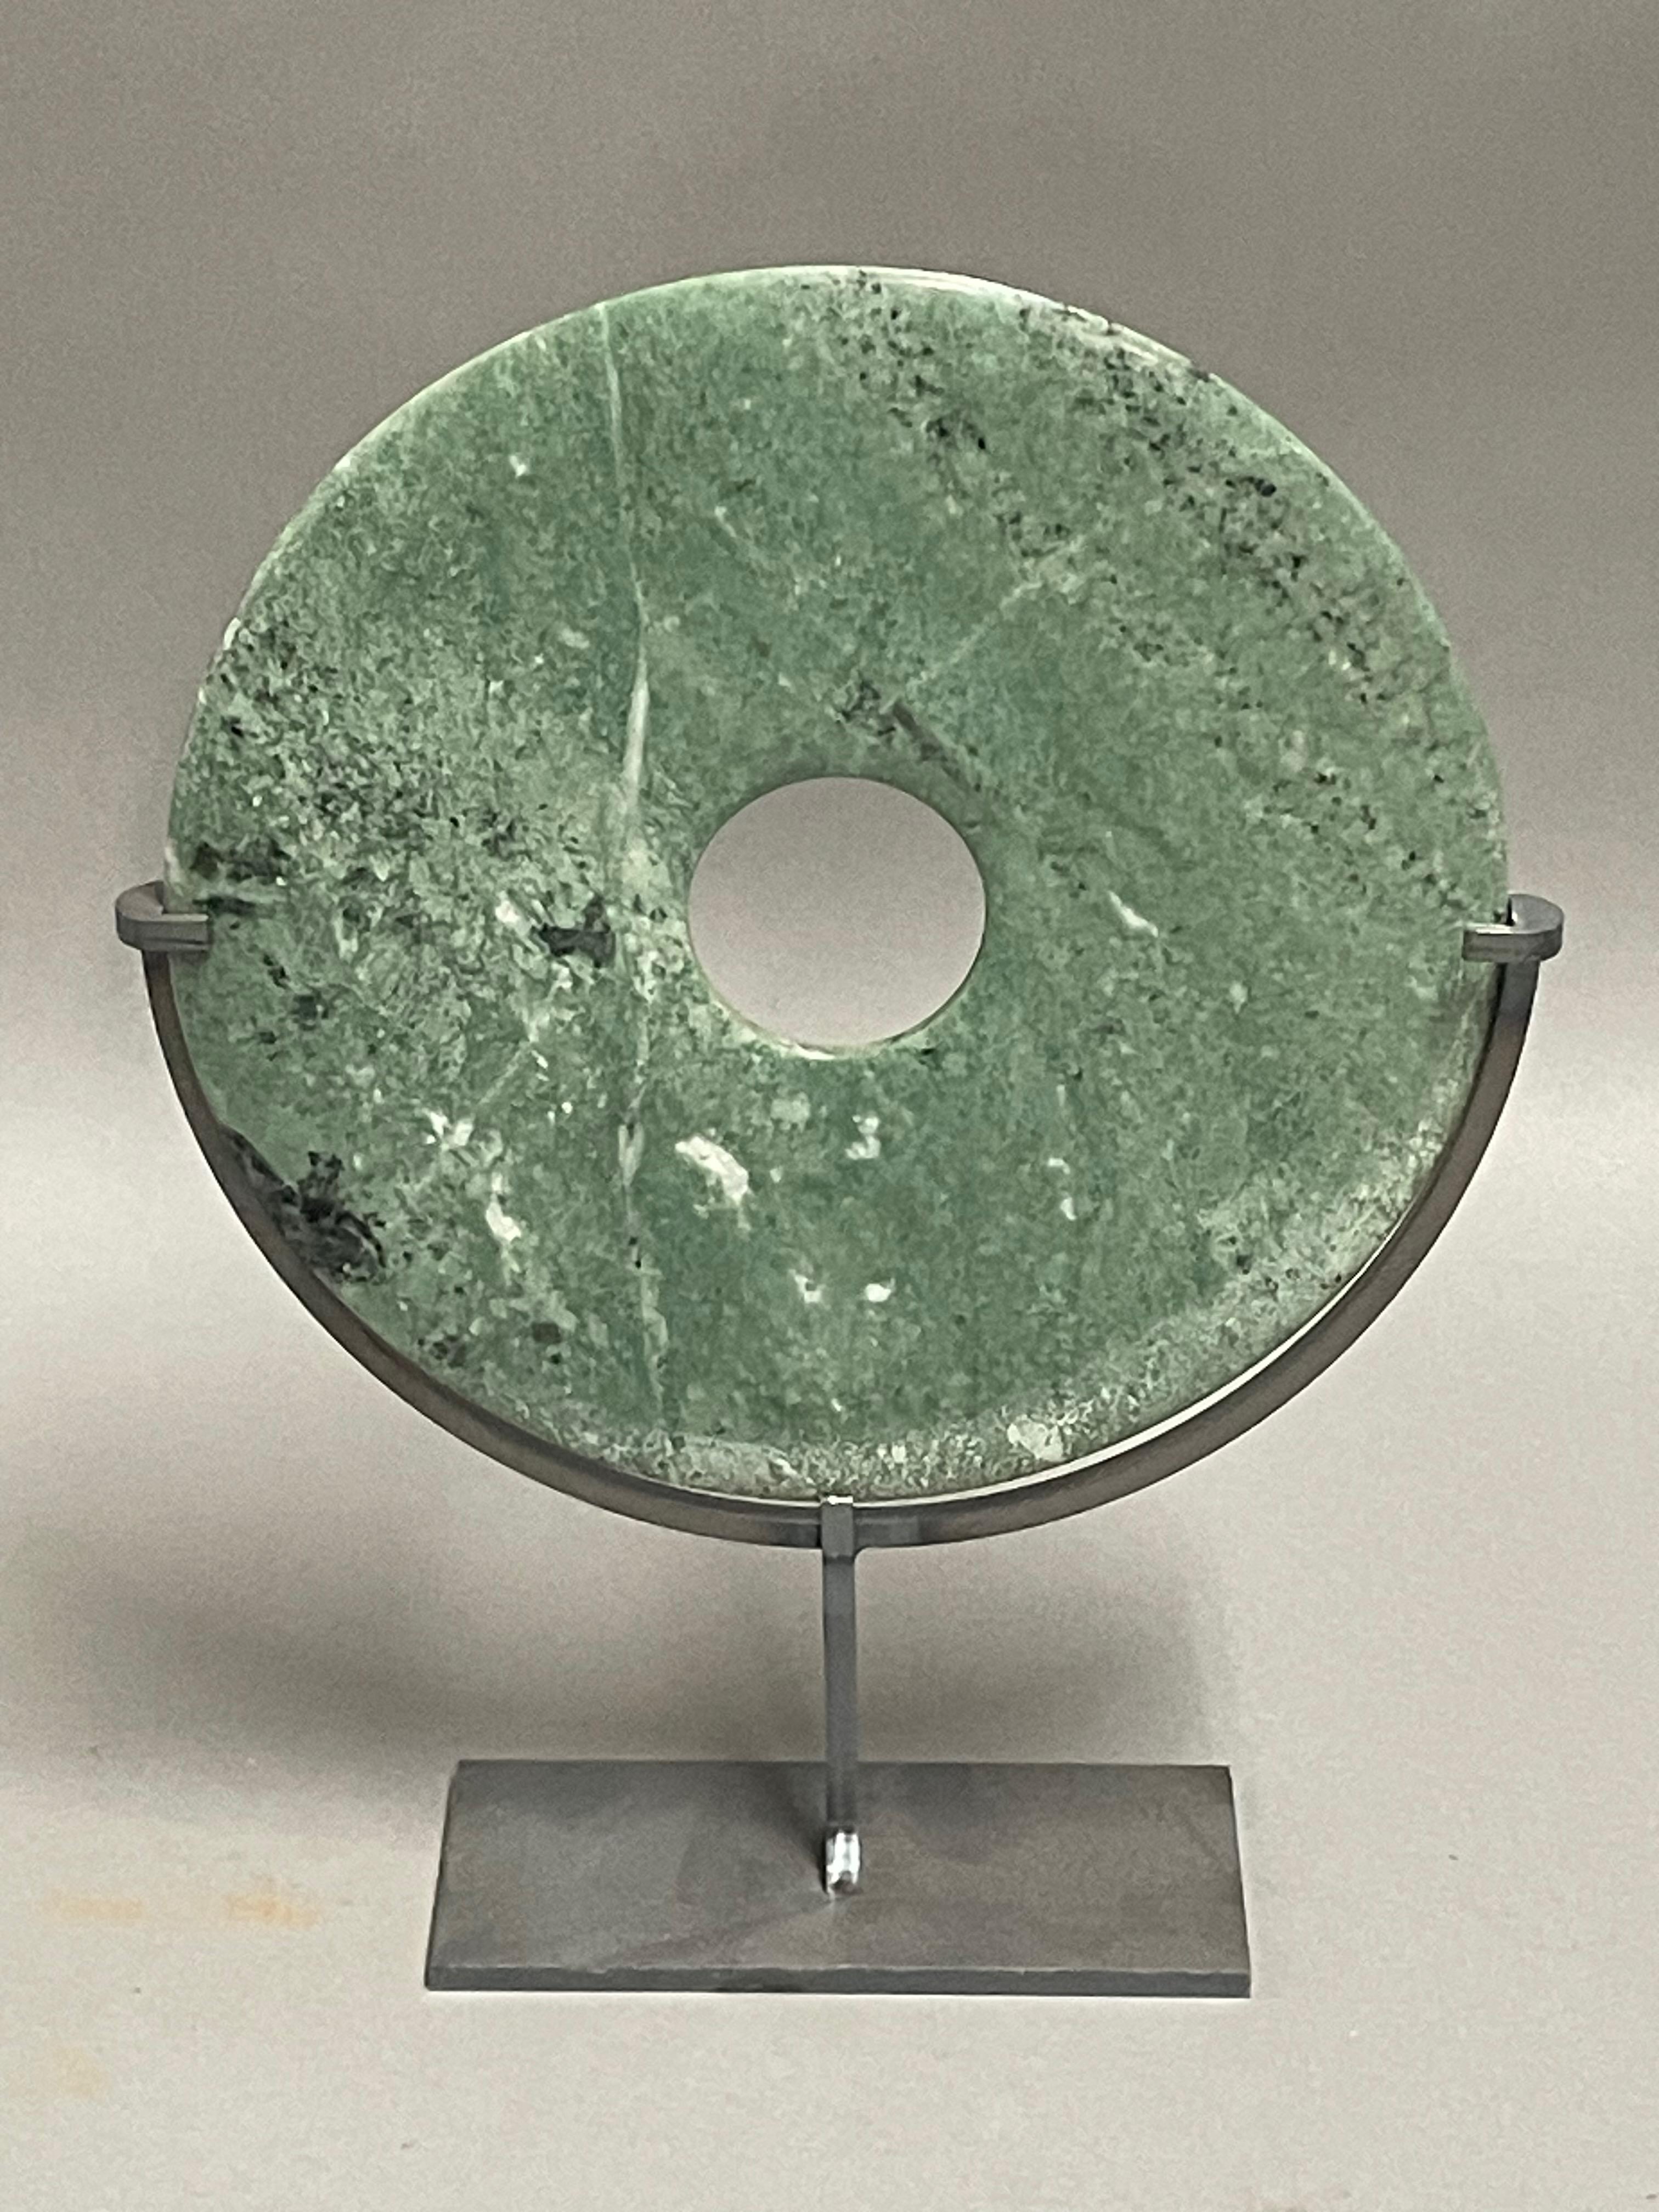 Jade Colored Set Of Two Jade Discs On Metal Stands, China, Contemporary For Sale 3